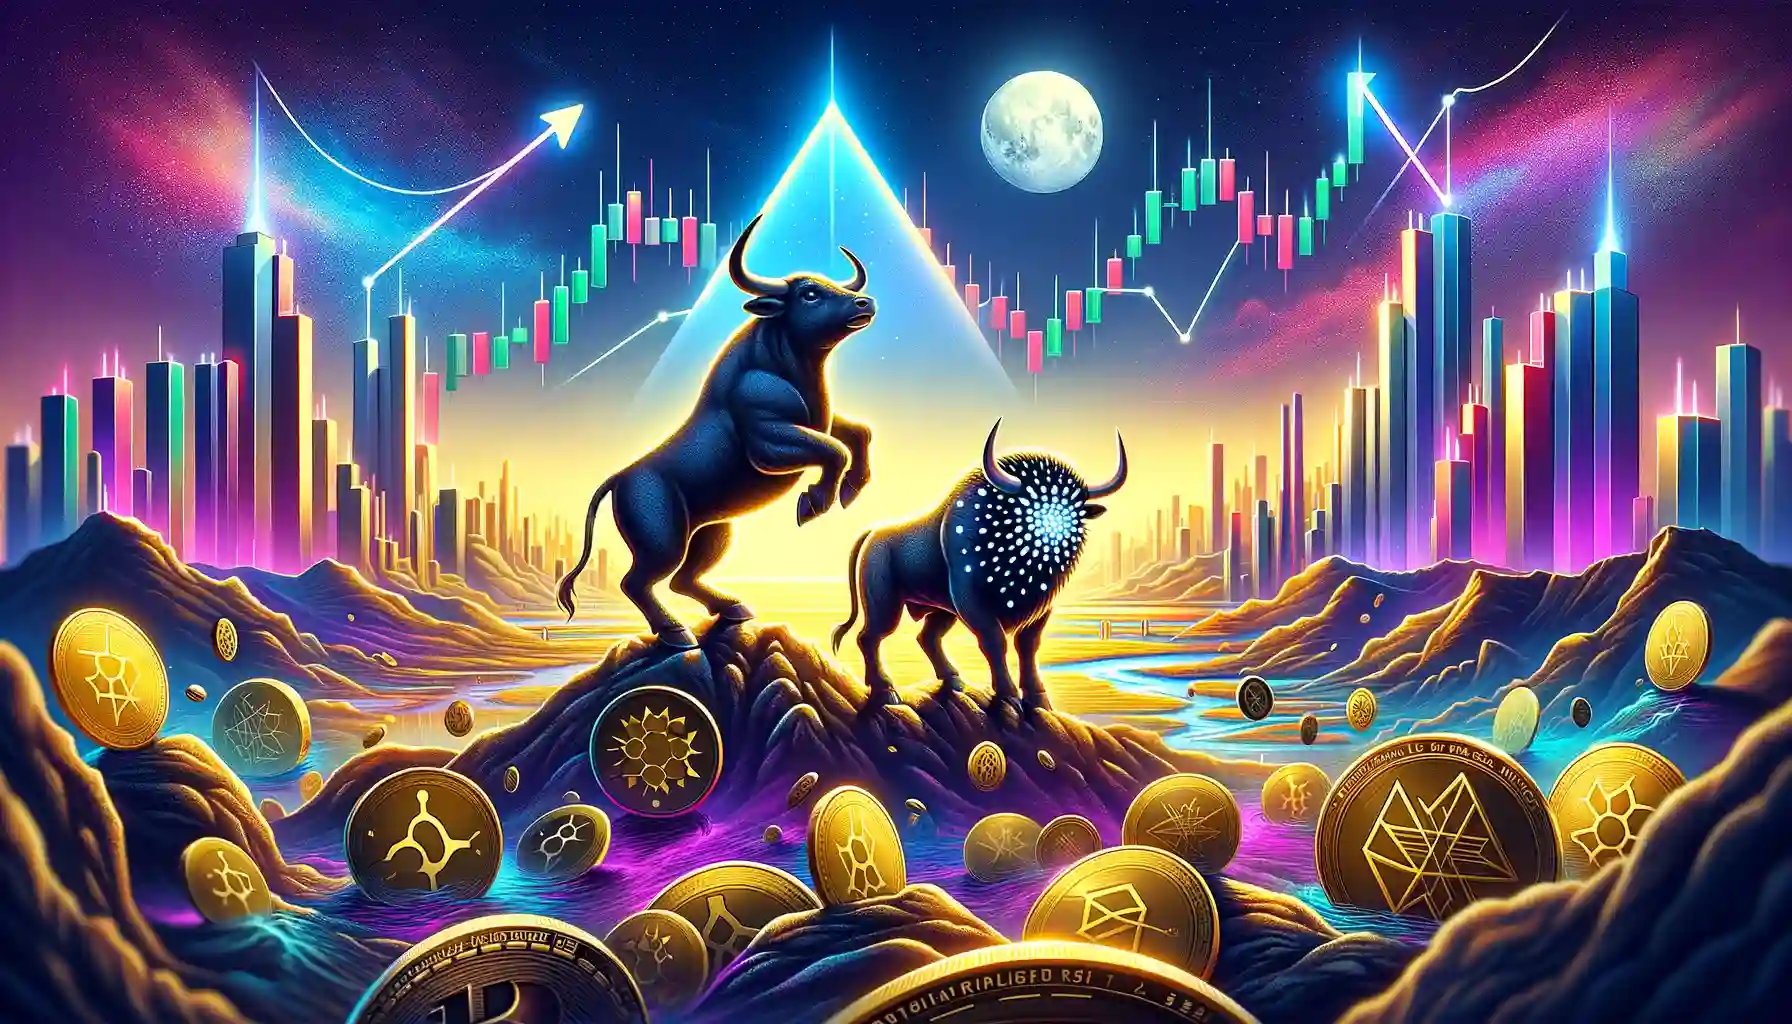 Cardano [ADA] starts bull run as XRP lags behind – What’s going on?